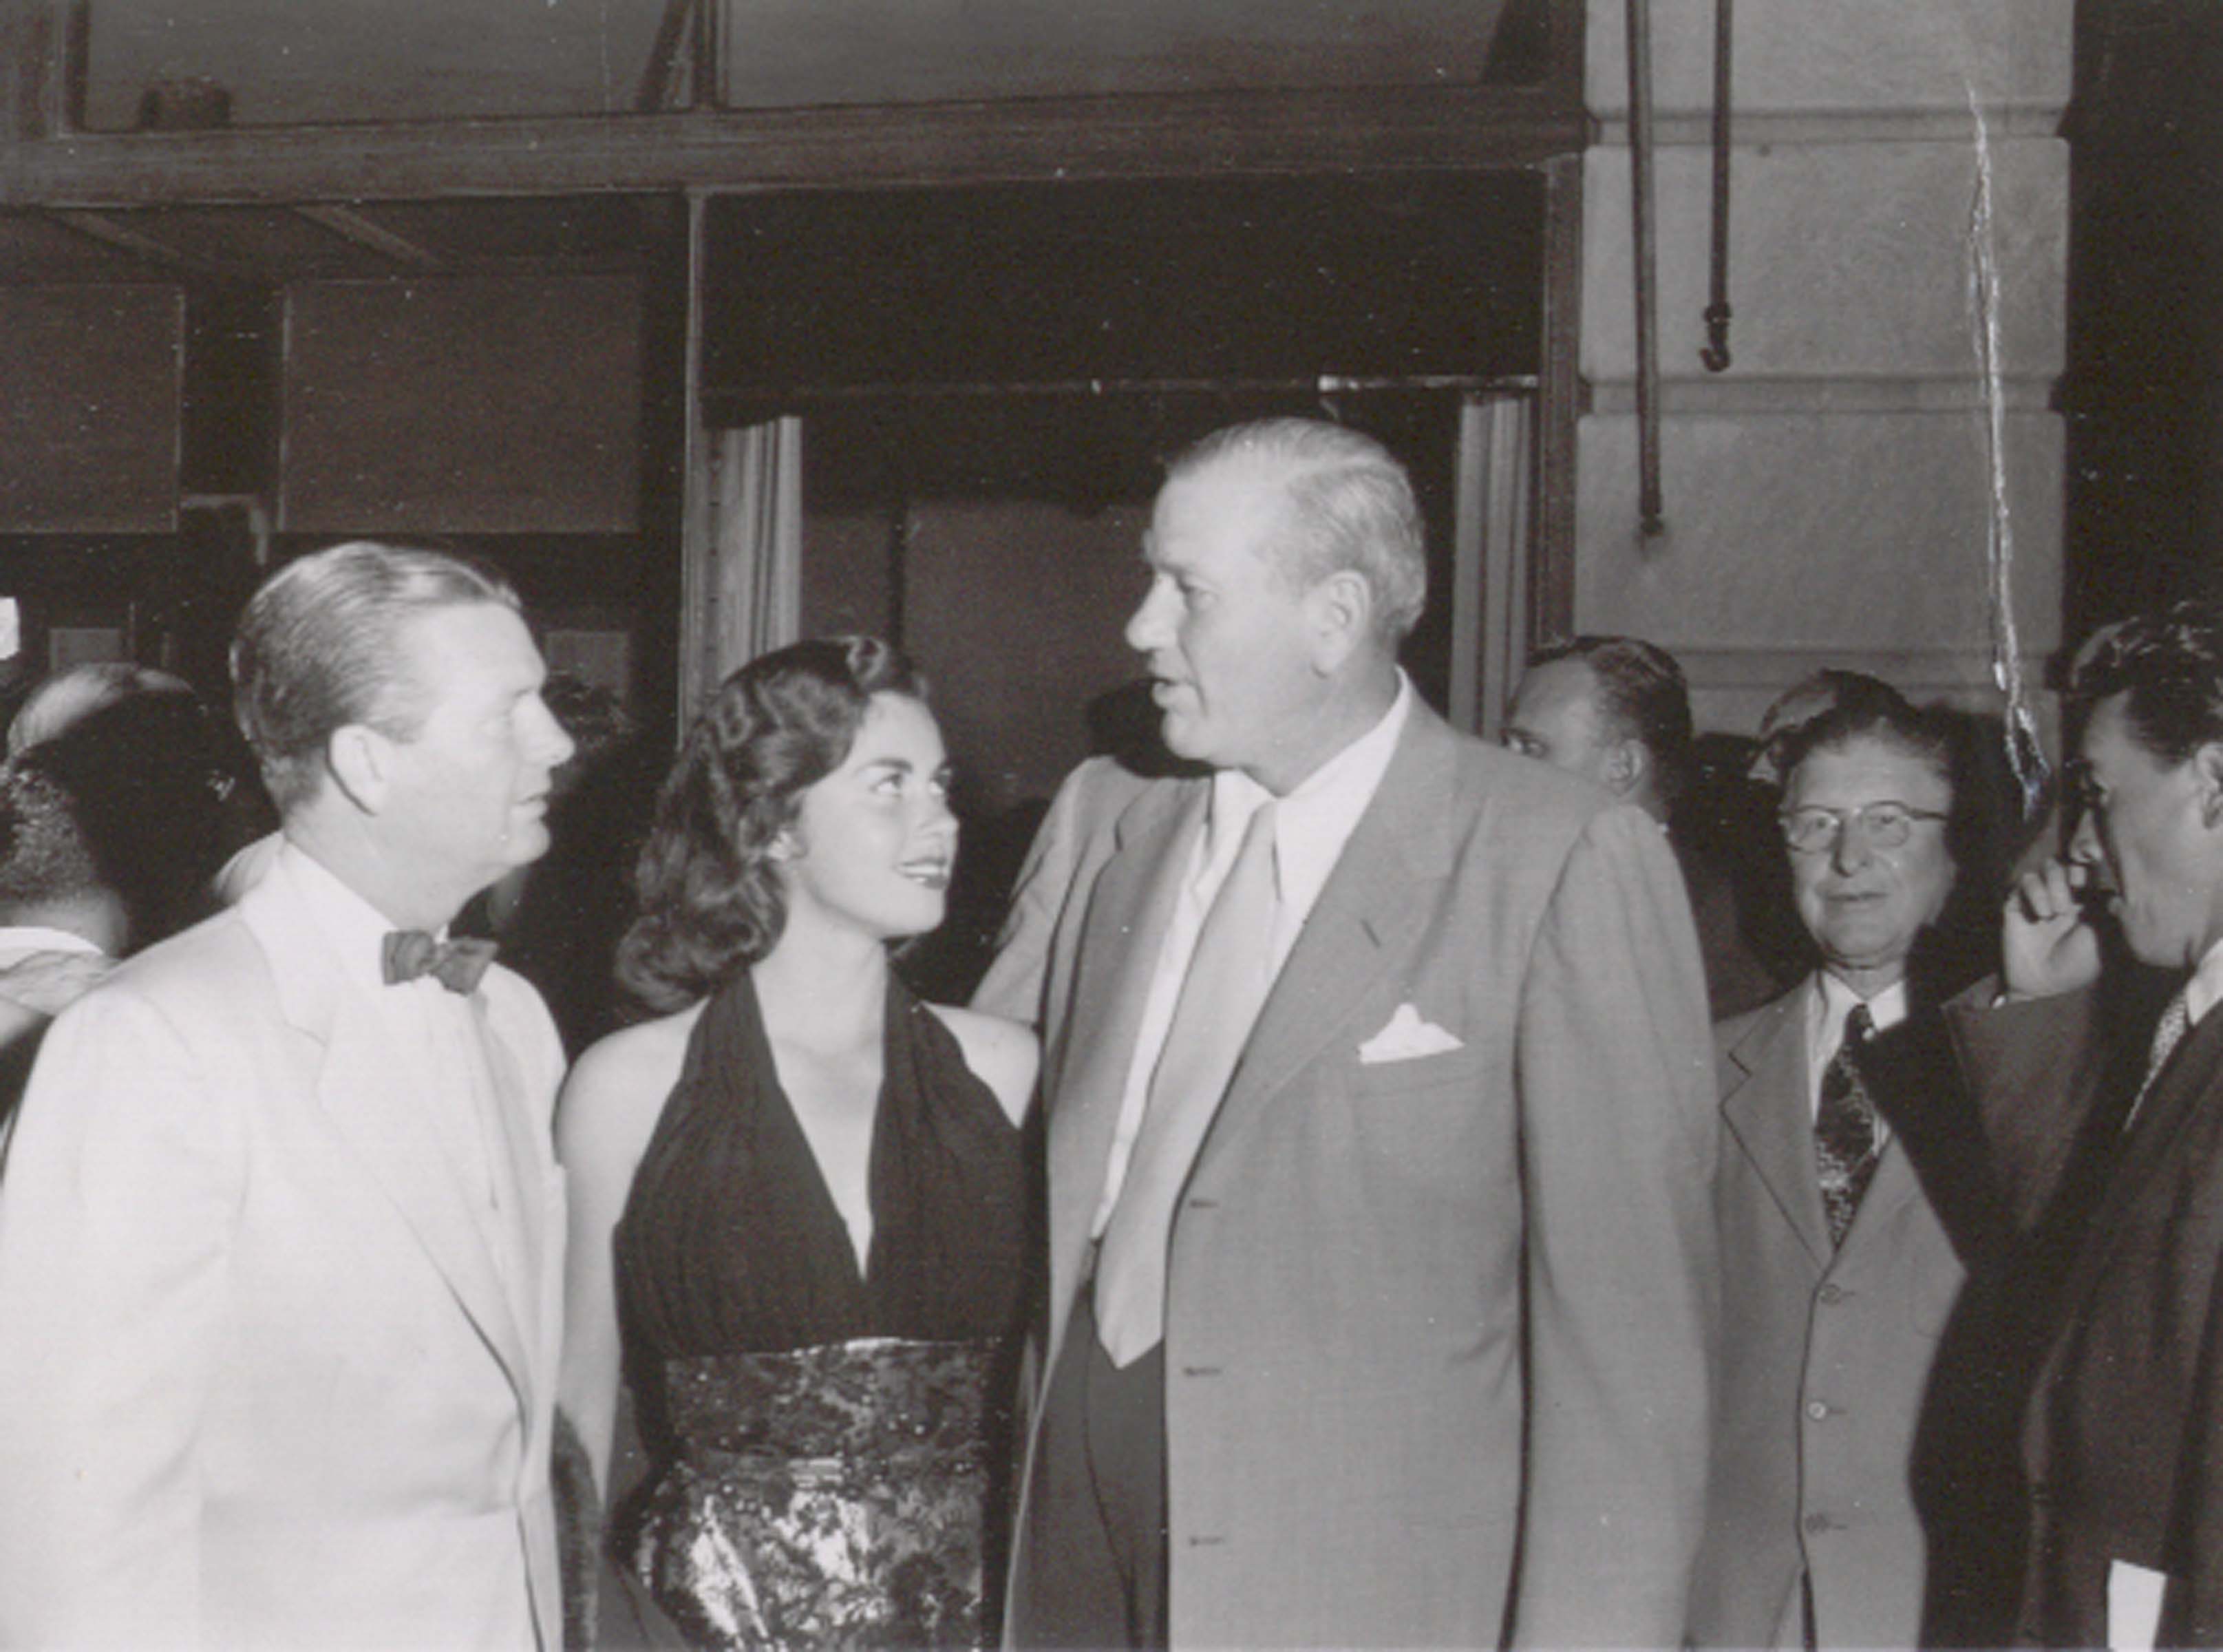 L-R: JIMMY DEMARET [MASTERS GOLF CHAMP (3 WINS)], Pin Up Icon JEANNE CARMEN, Baseball Hall of Famer DIZZY DEAN at NYC Party